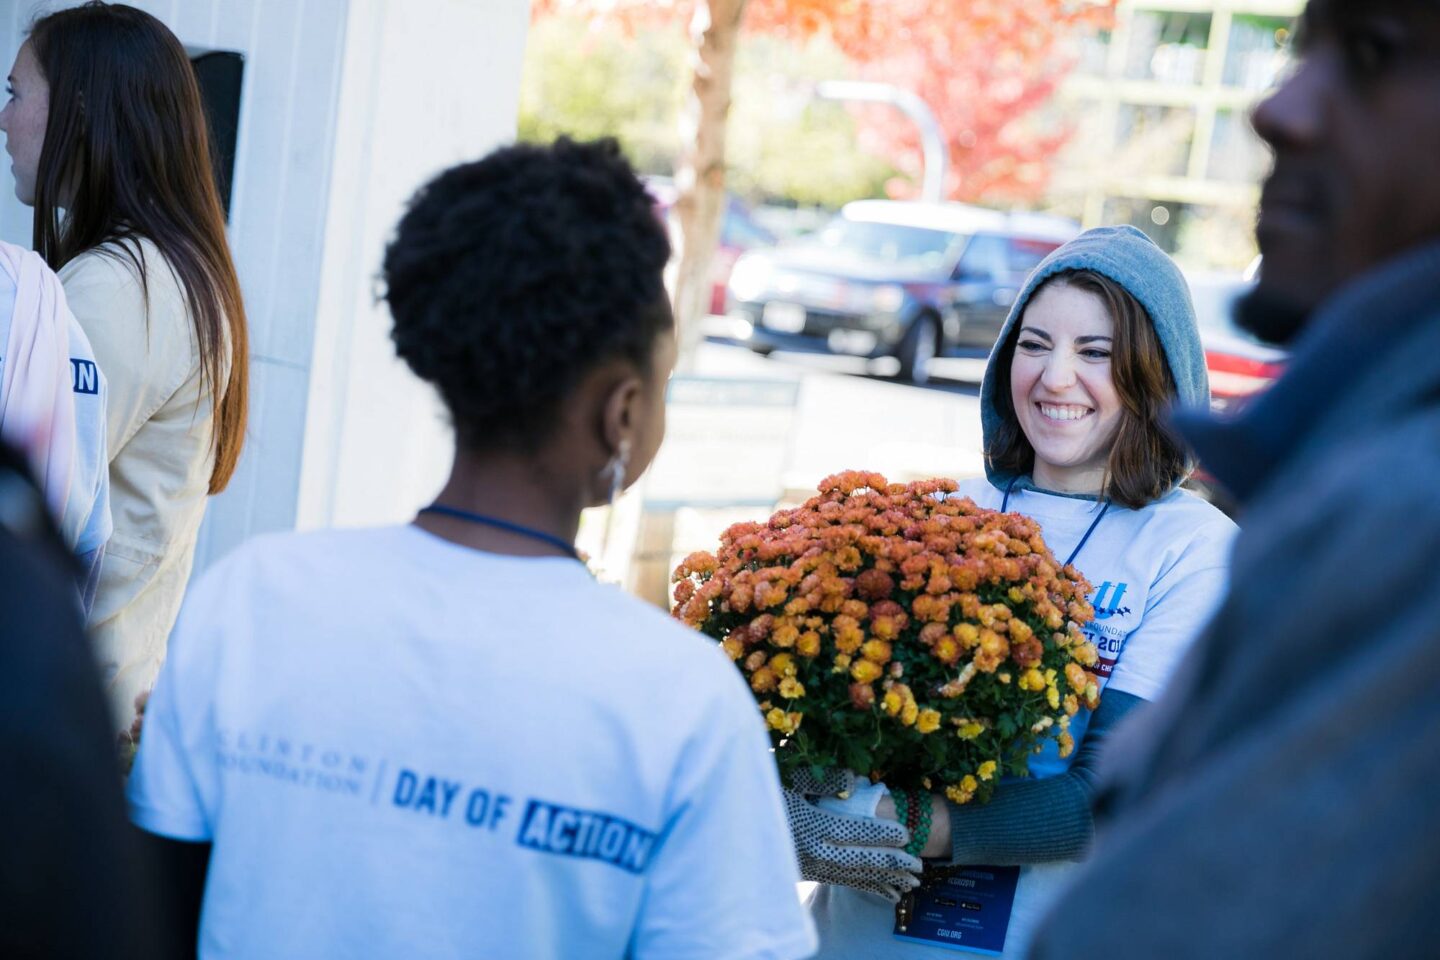 Several individuals stand outside at a volunteer event. They wear blue Day of Action shirts and one is holding orange and yellow flowers.